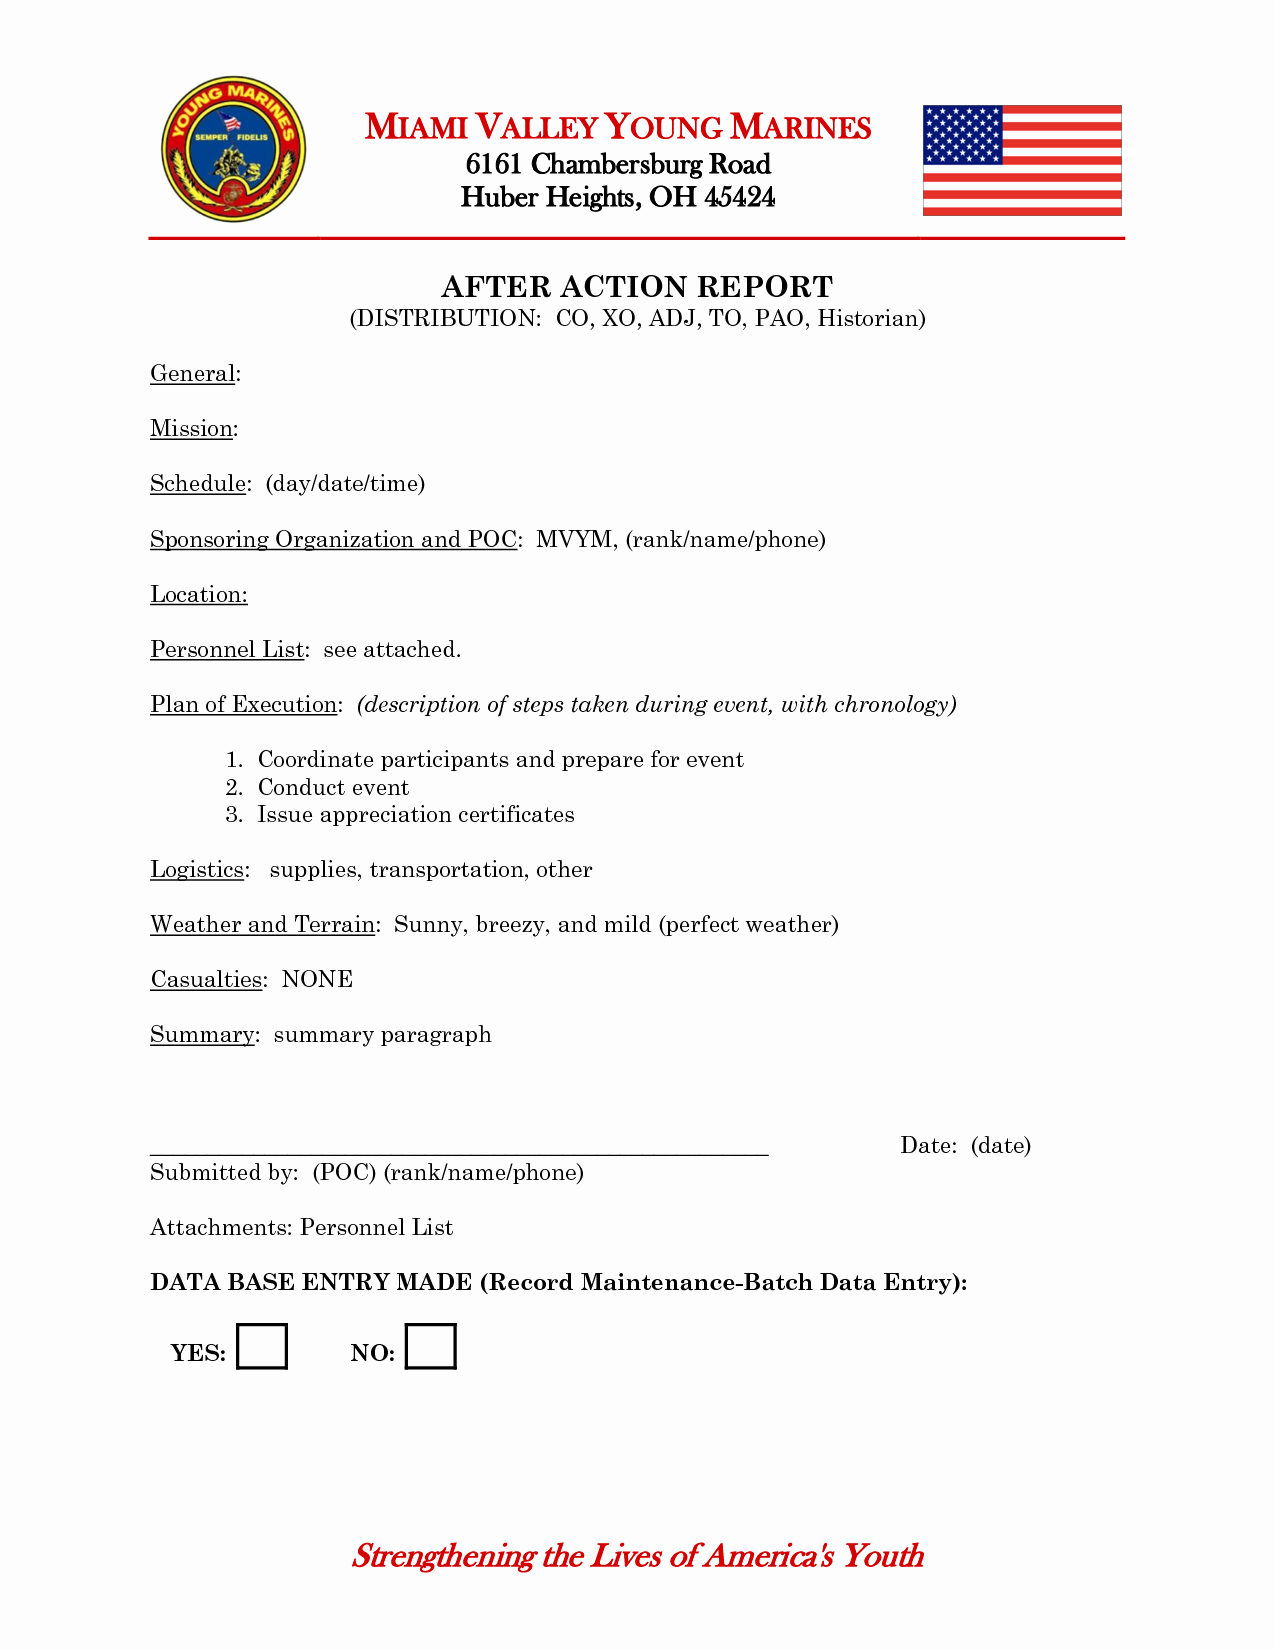 After Action Report Template Unique after Action Report Template